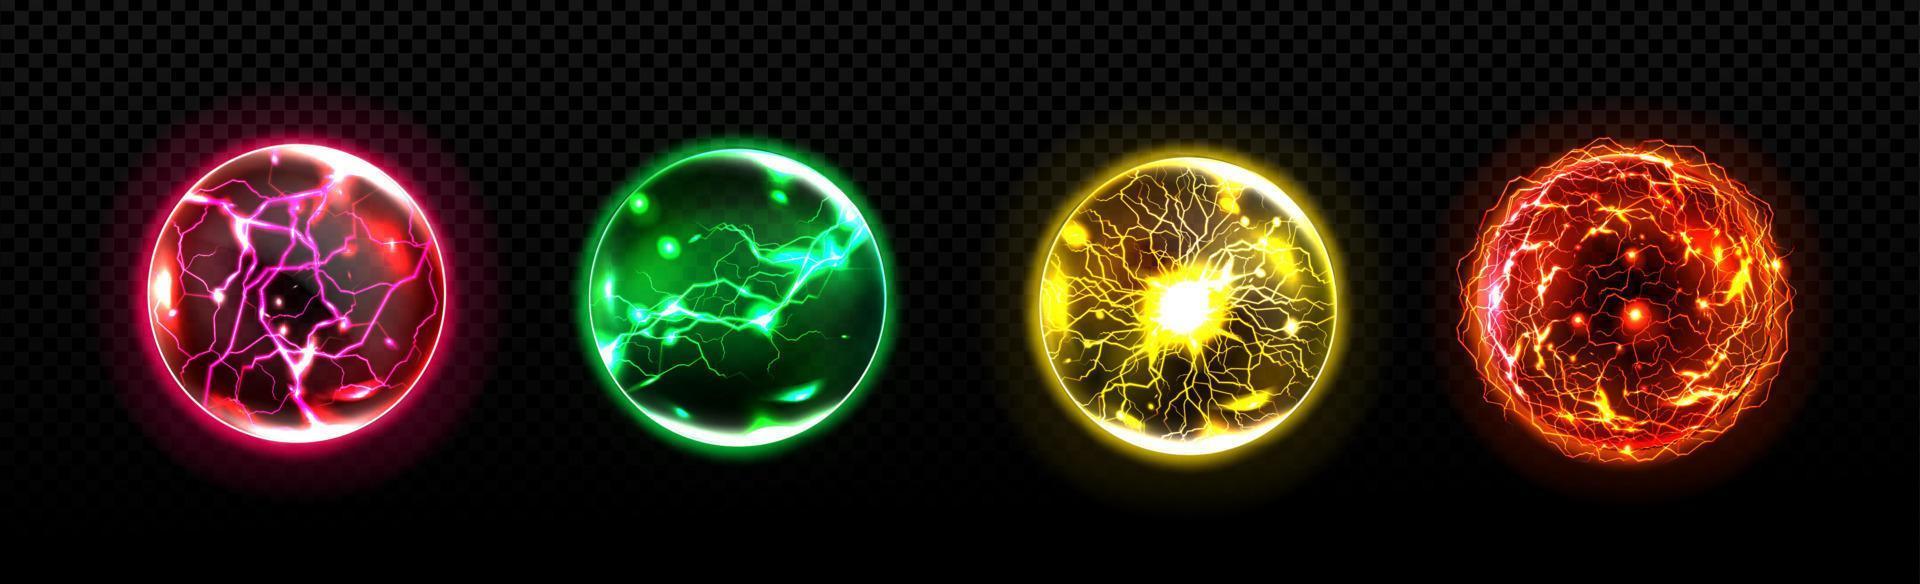 Set of energy balls with lightning effect vector